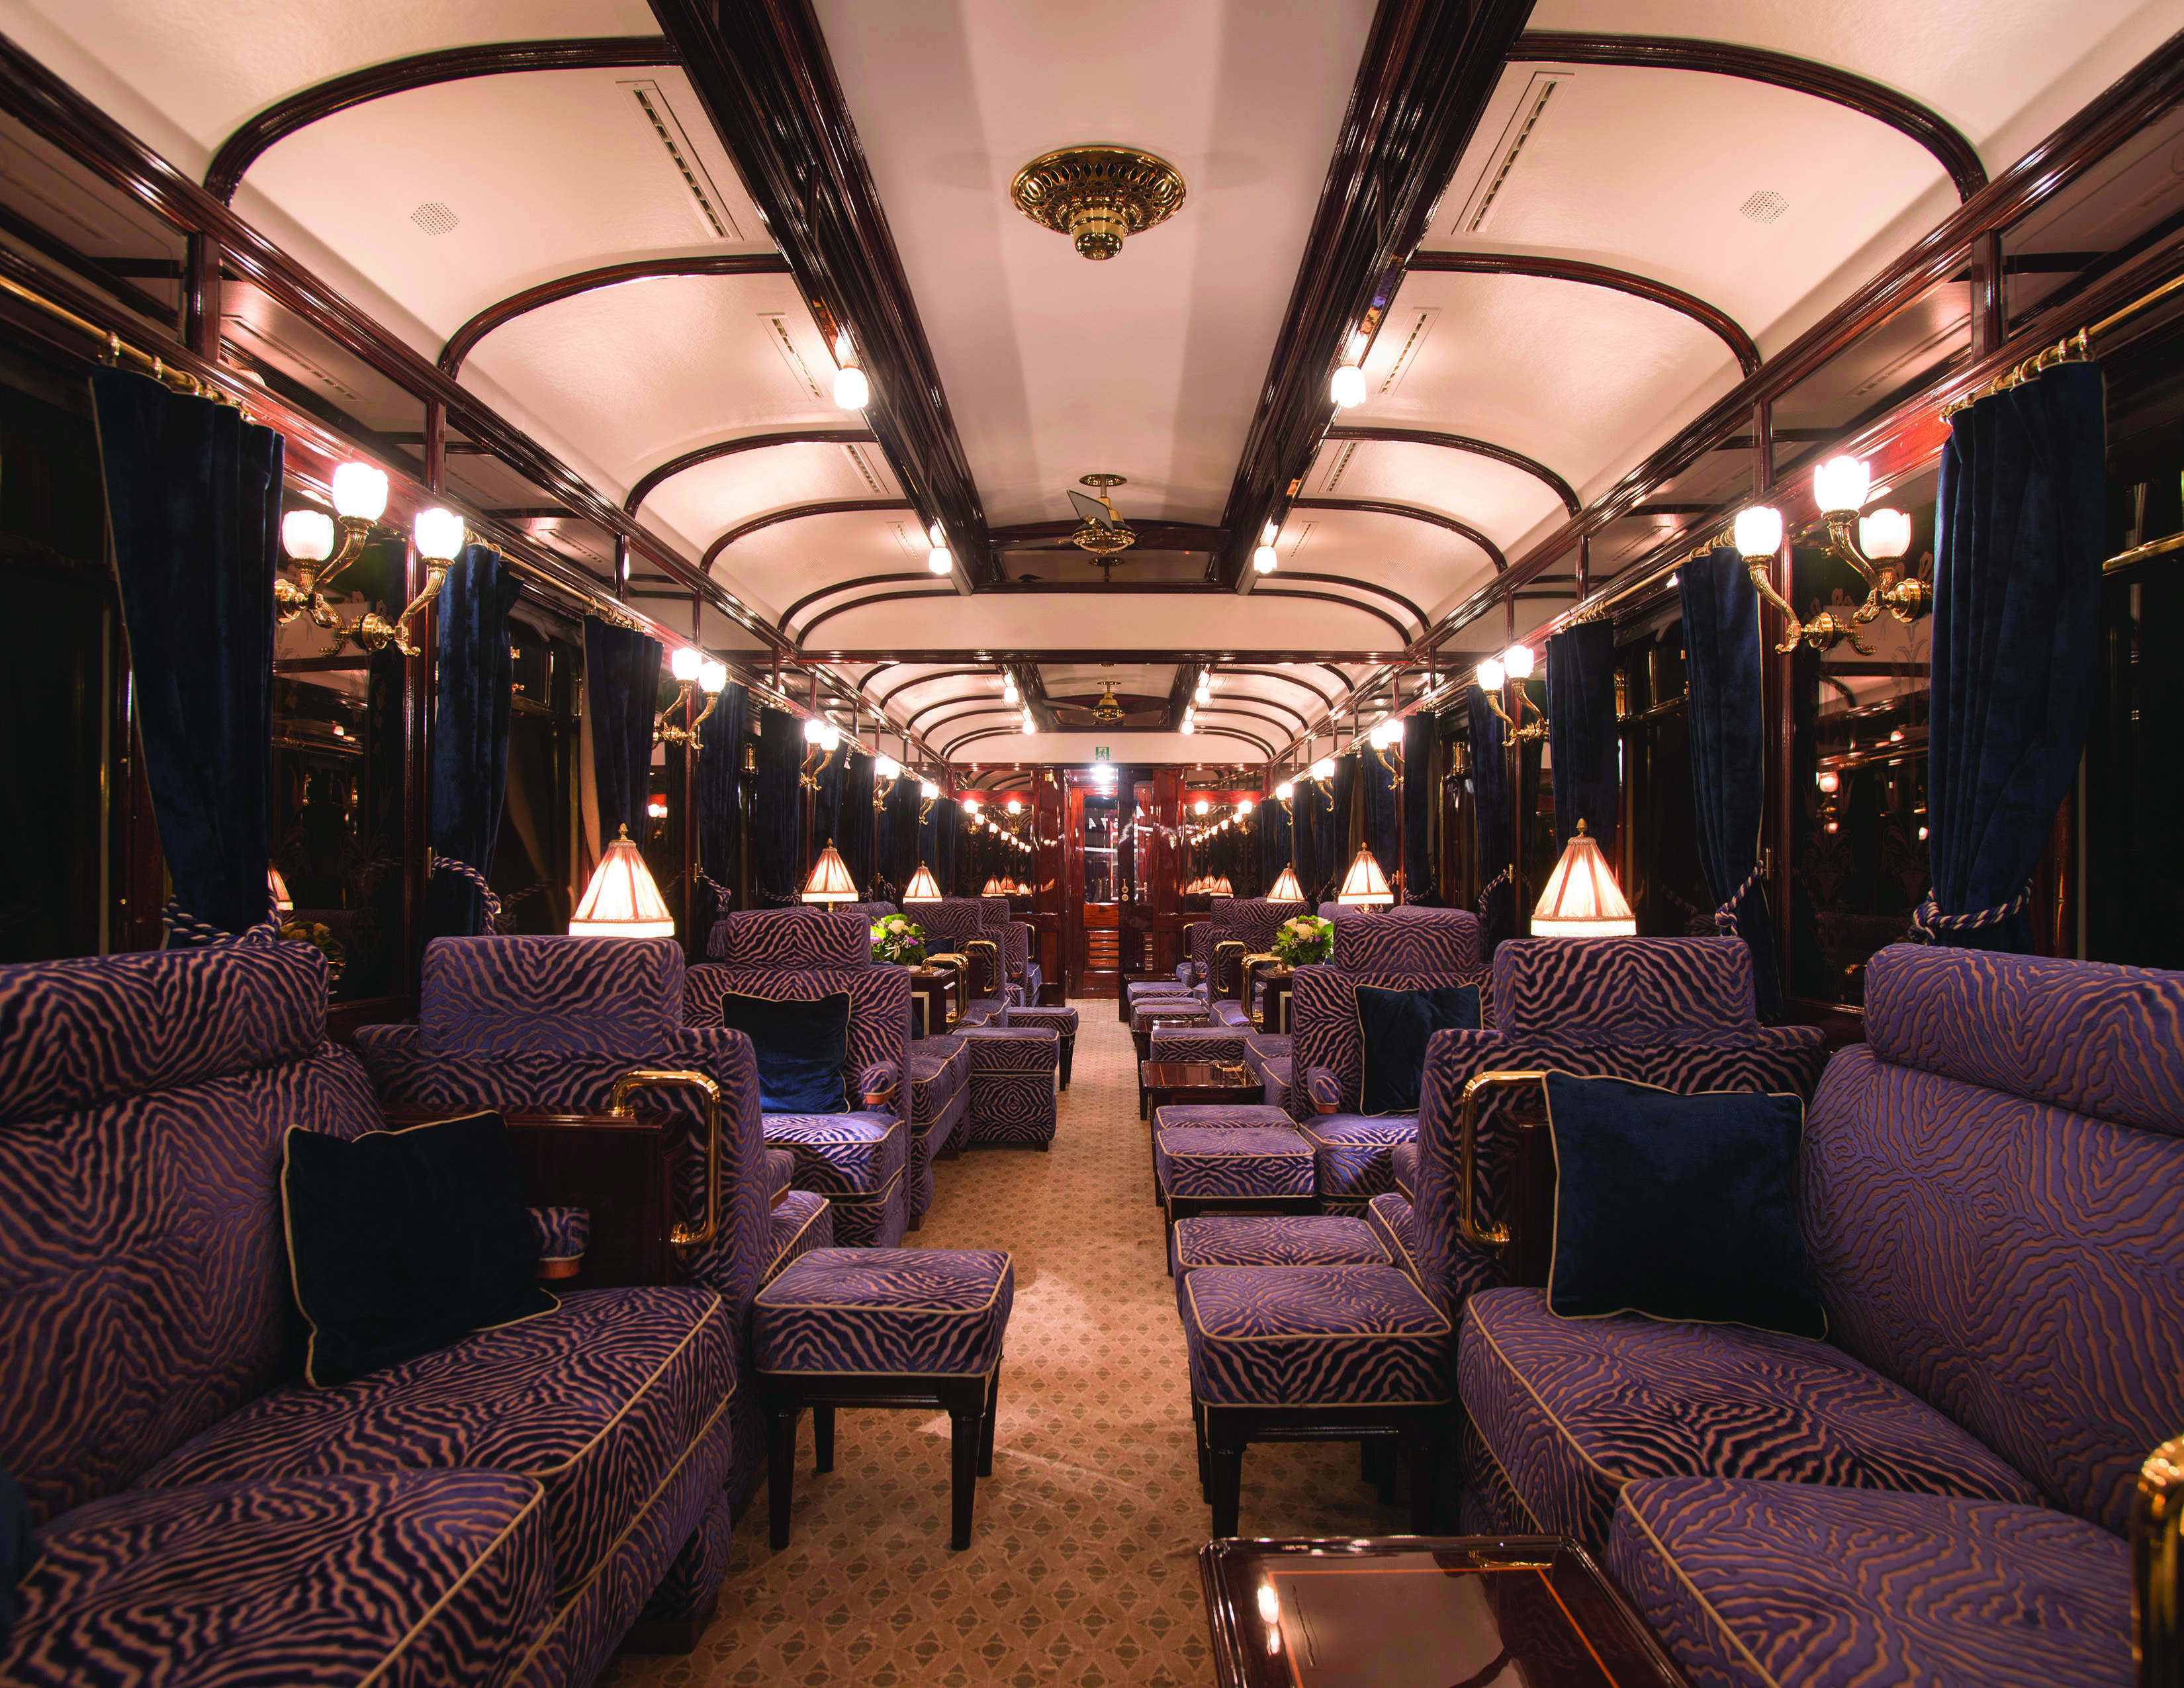 Can you still travel on the Orient Express train in 2017?